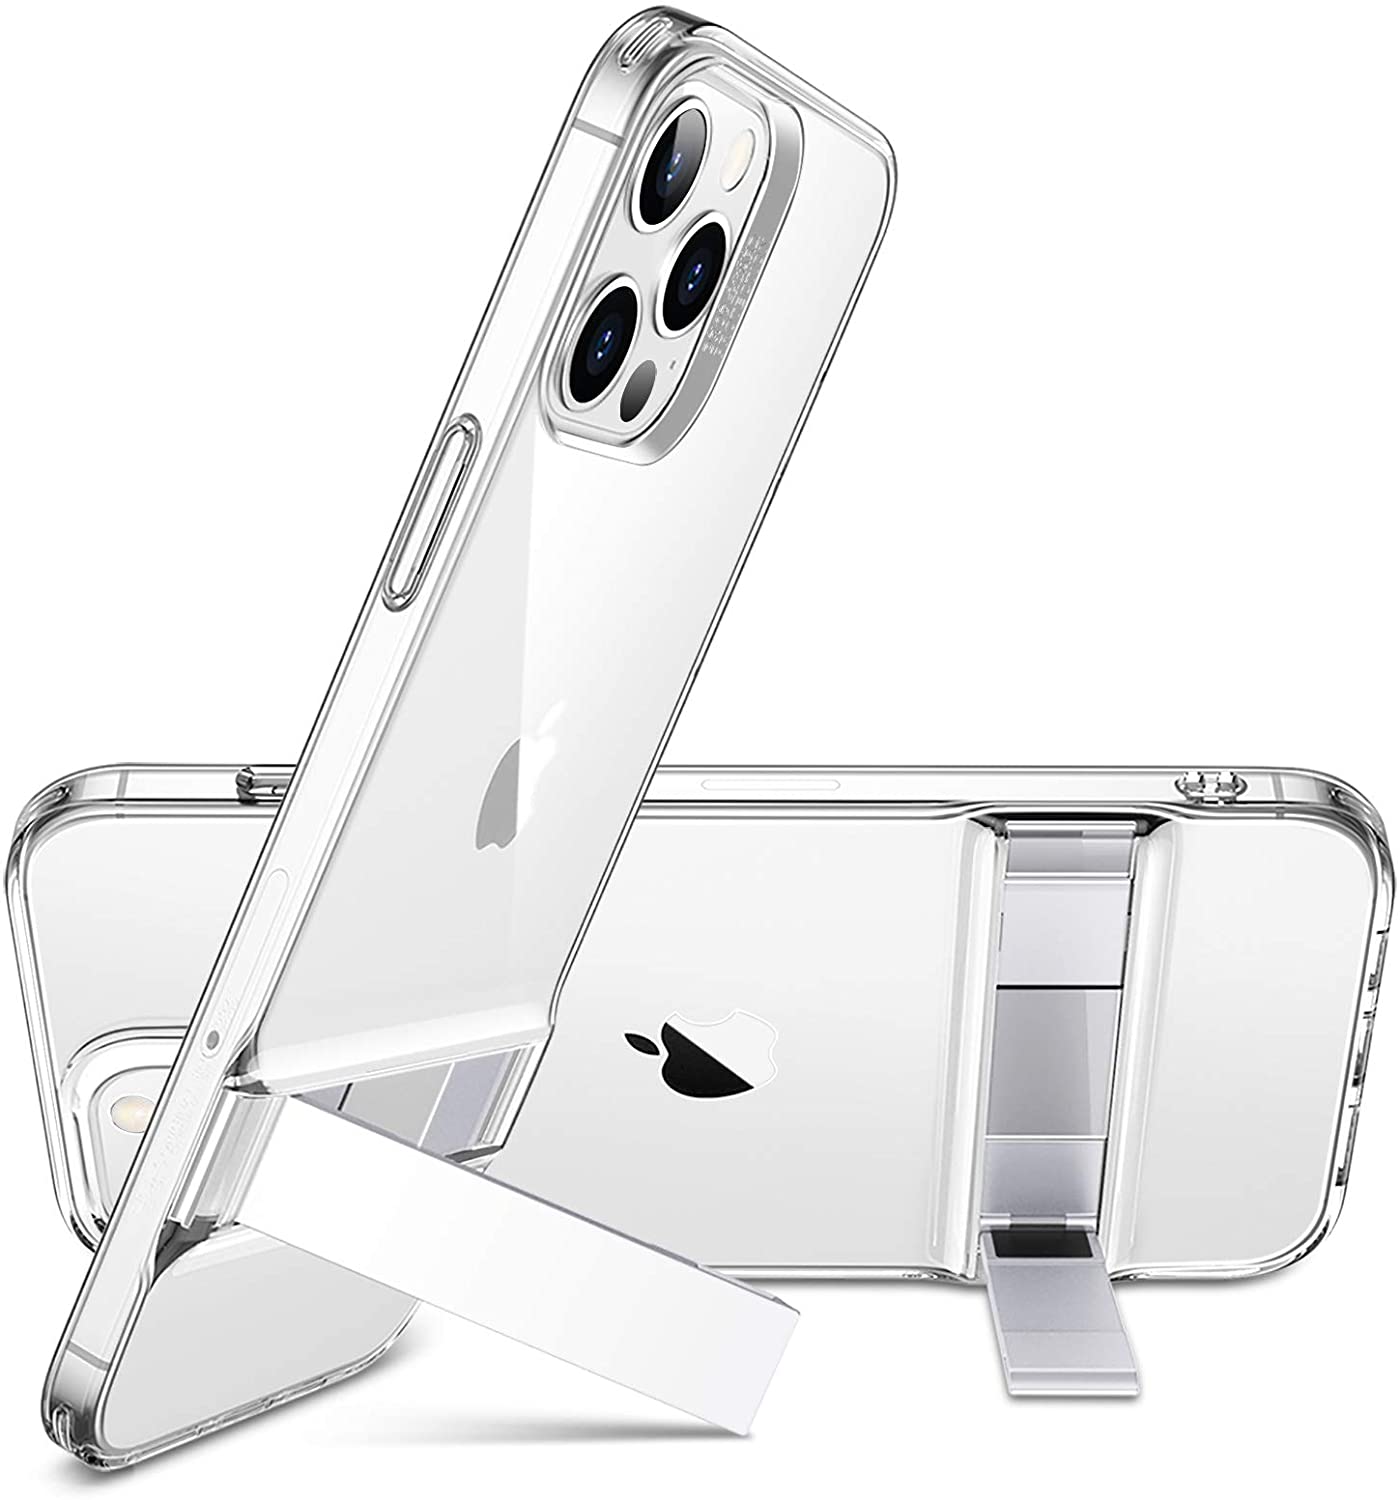 ESR Air Shield Boost High Quality Compatible with iPhone 12 Pro Max Case - Clear (110011)